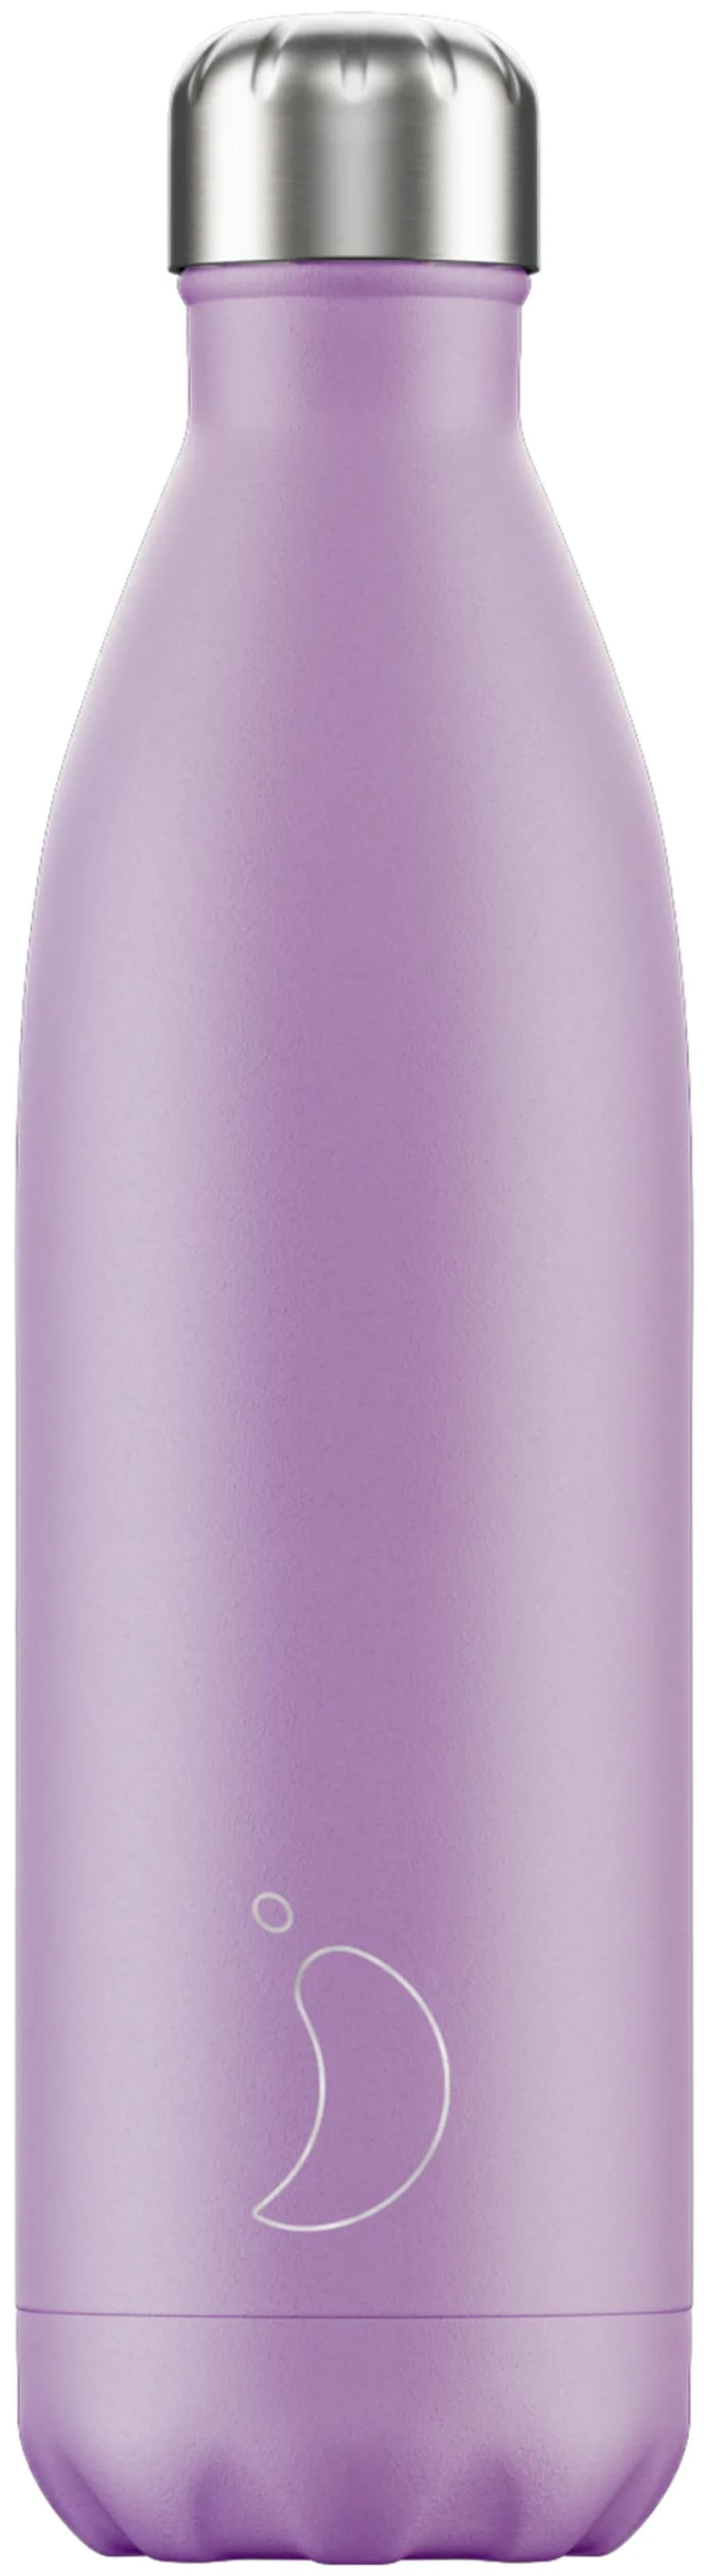 Chilly's 750ml Purple Stainless Steel Pastel Bottle